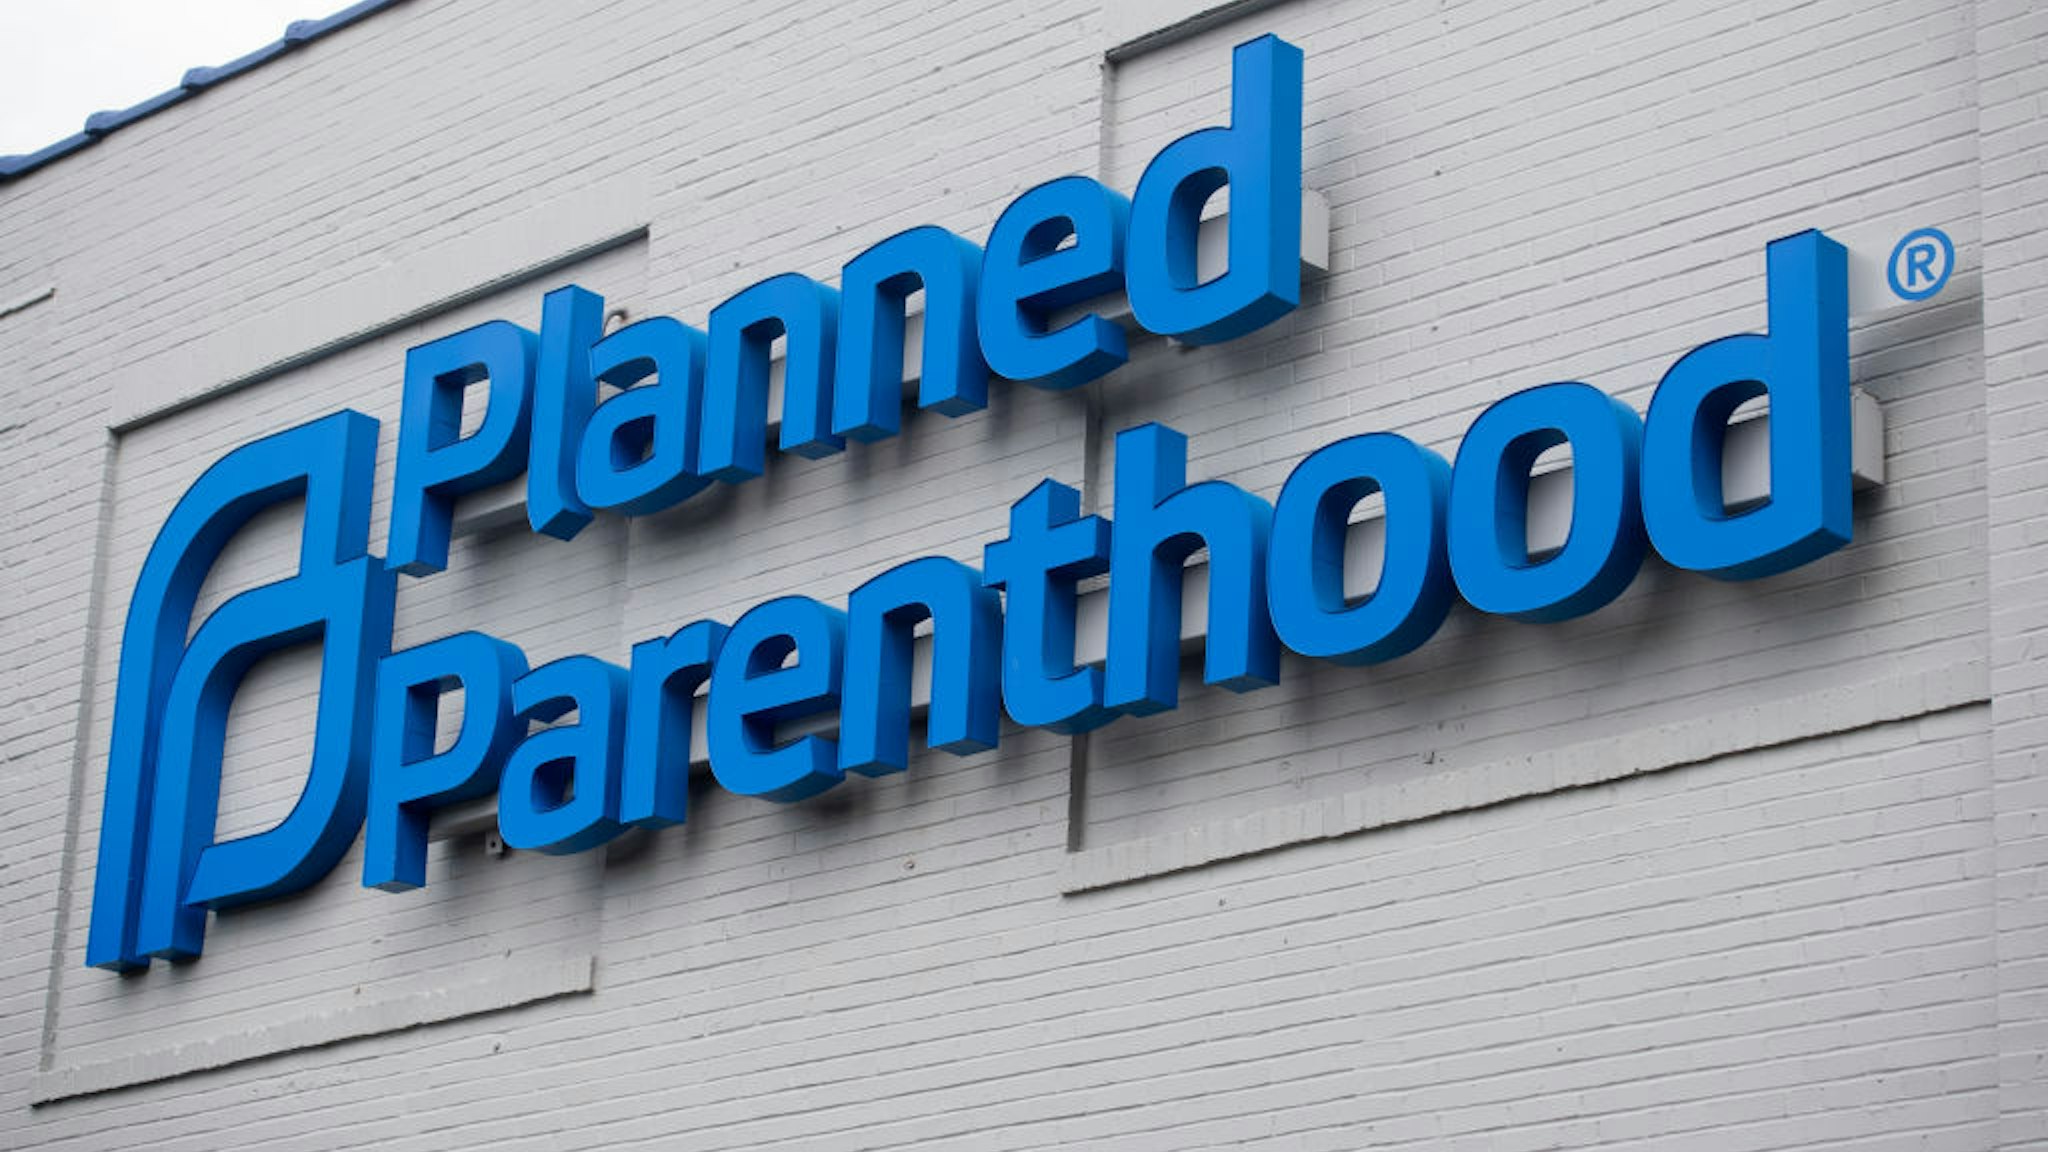 The logo of Planned Parenthood is seen outside the Planned Parenthood Reproductive Health Services Center in St. Louis, Missouri, May 30, 2019